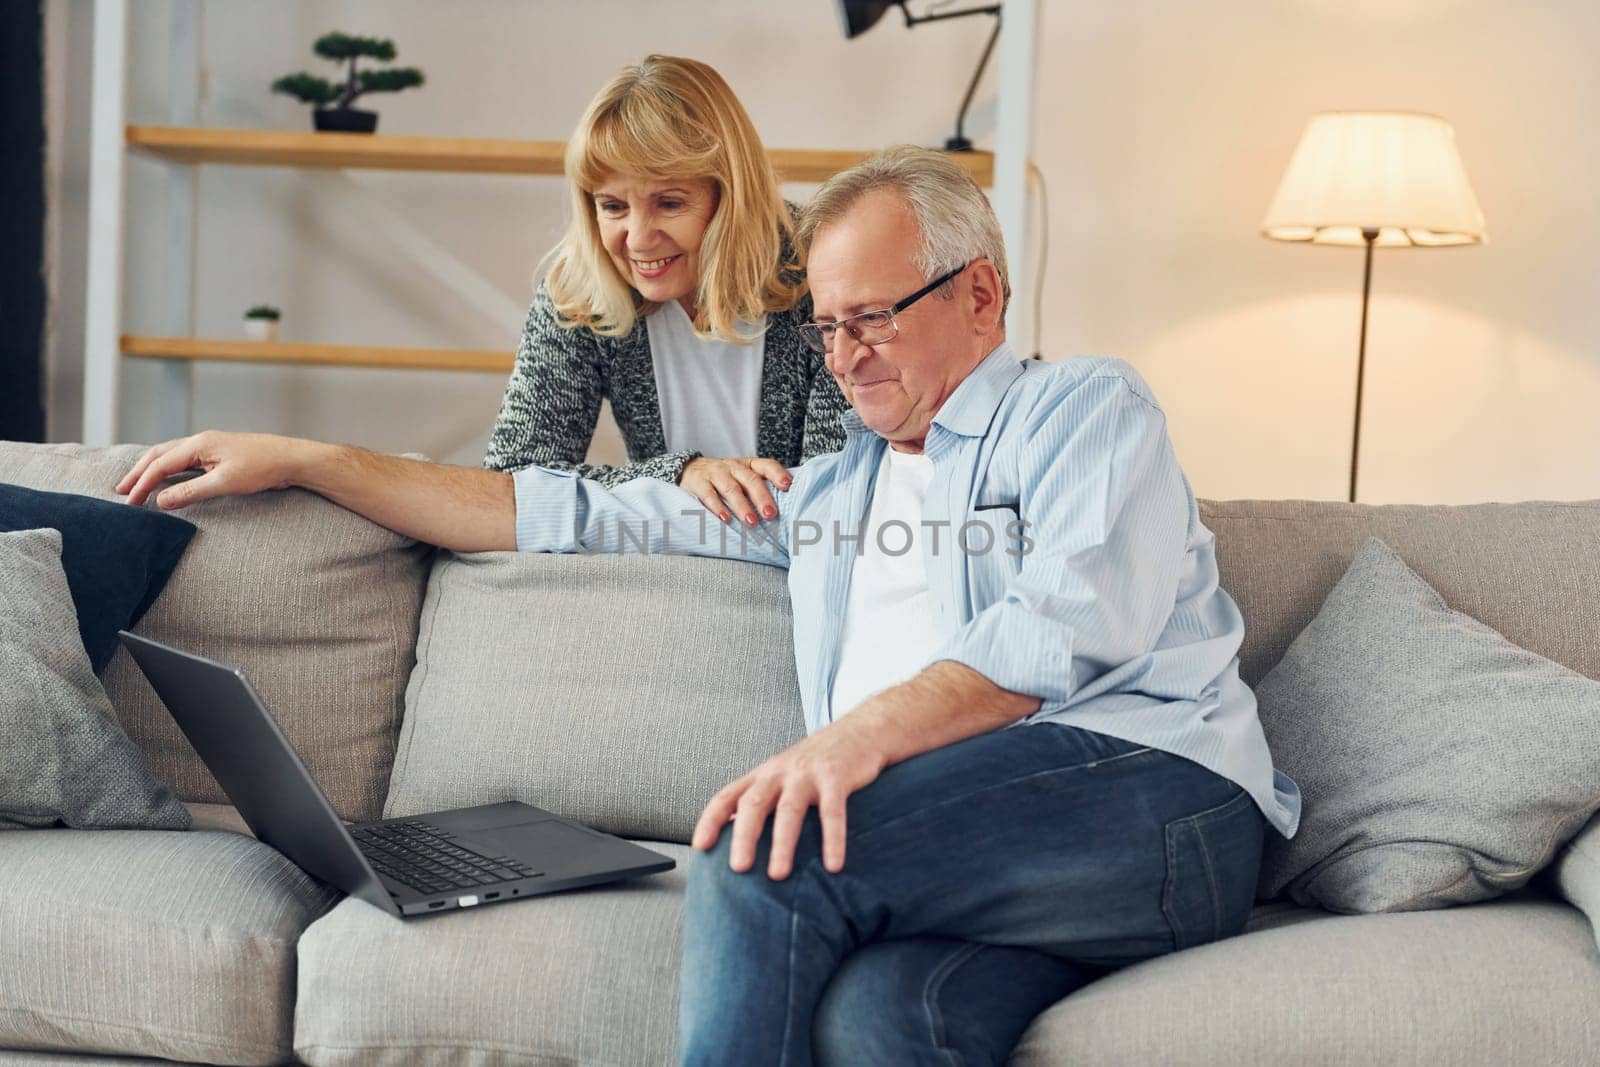 With modern laptop. Senior man and woman is together at home by Standret